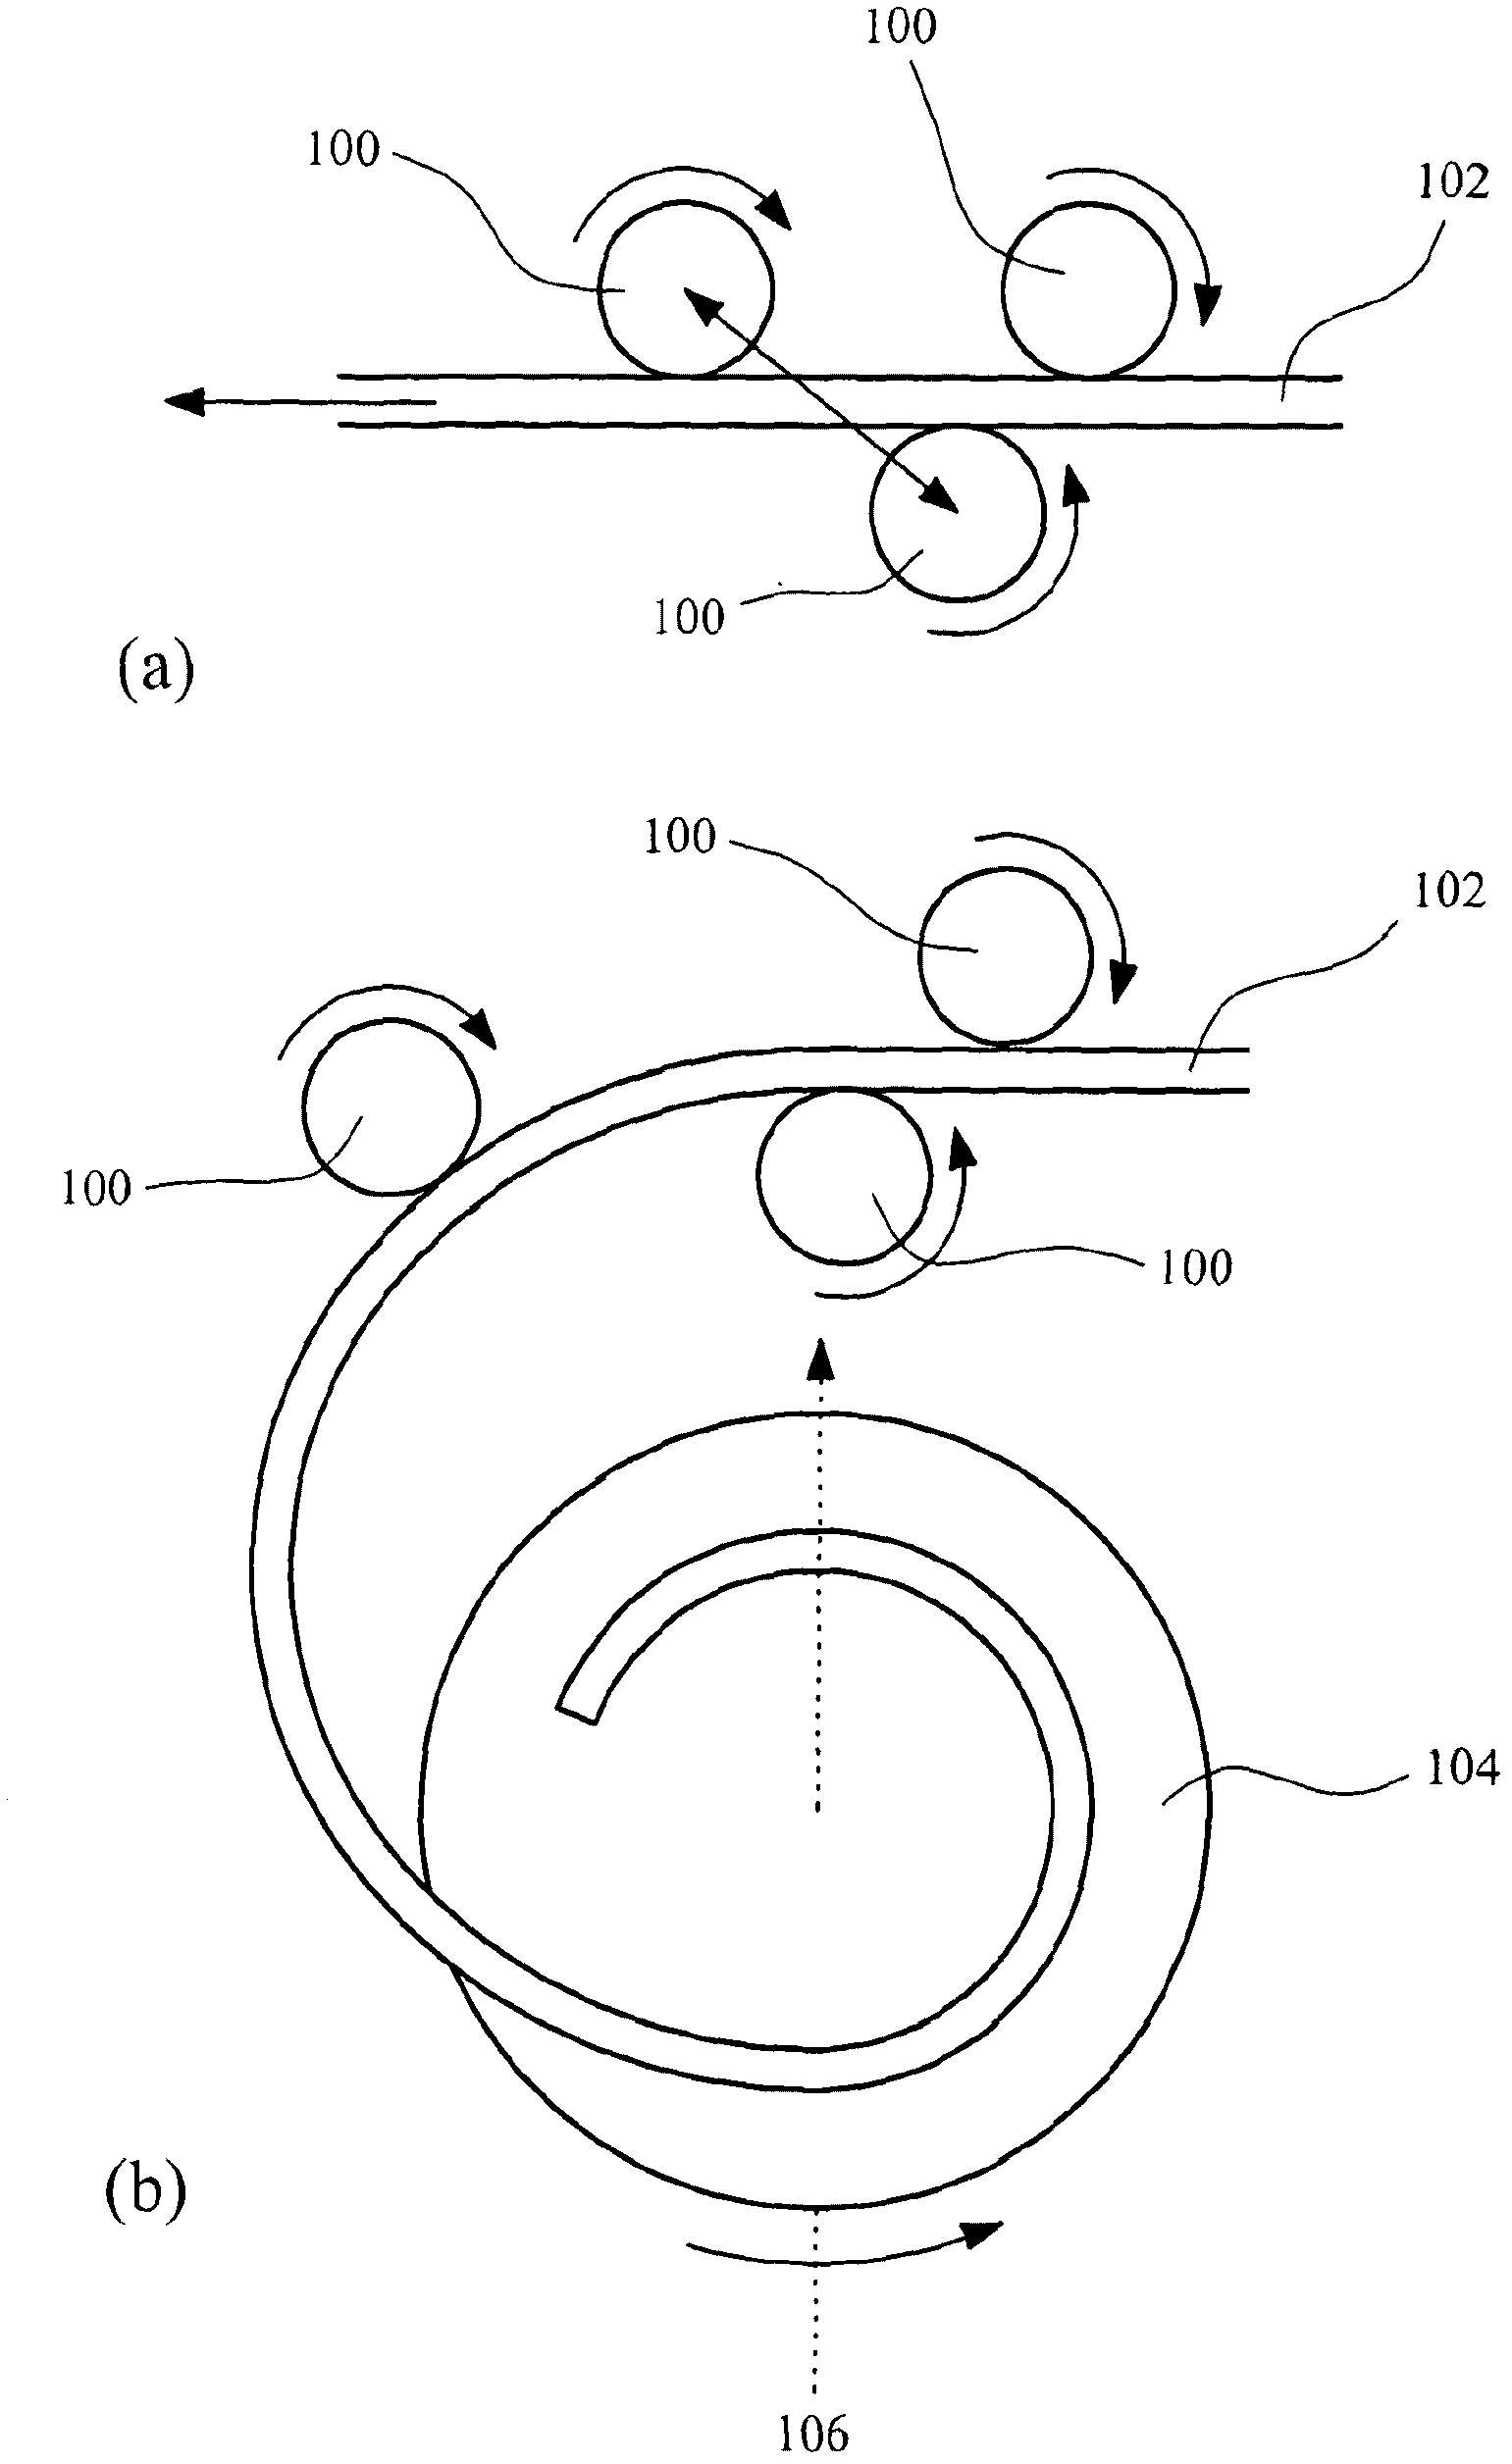 A coil winding device and method of winding an elongate member